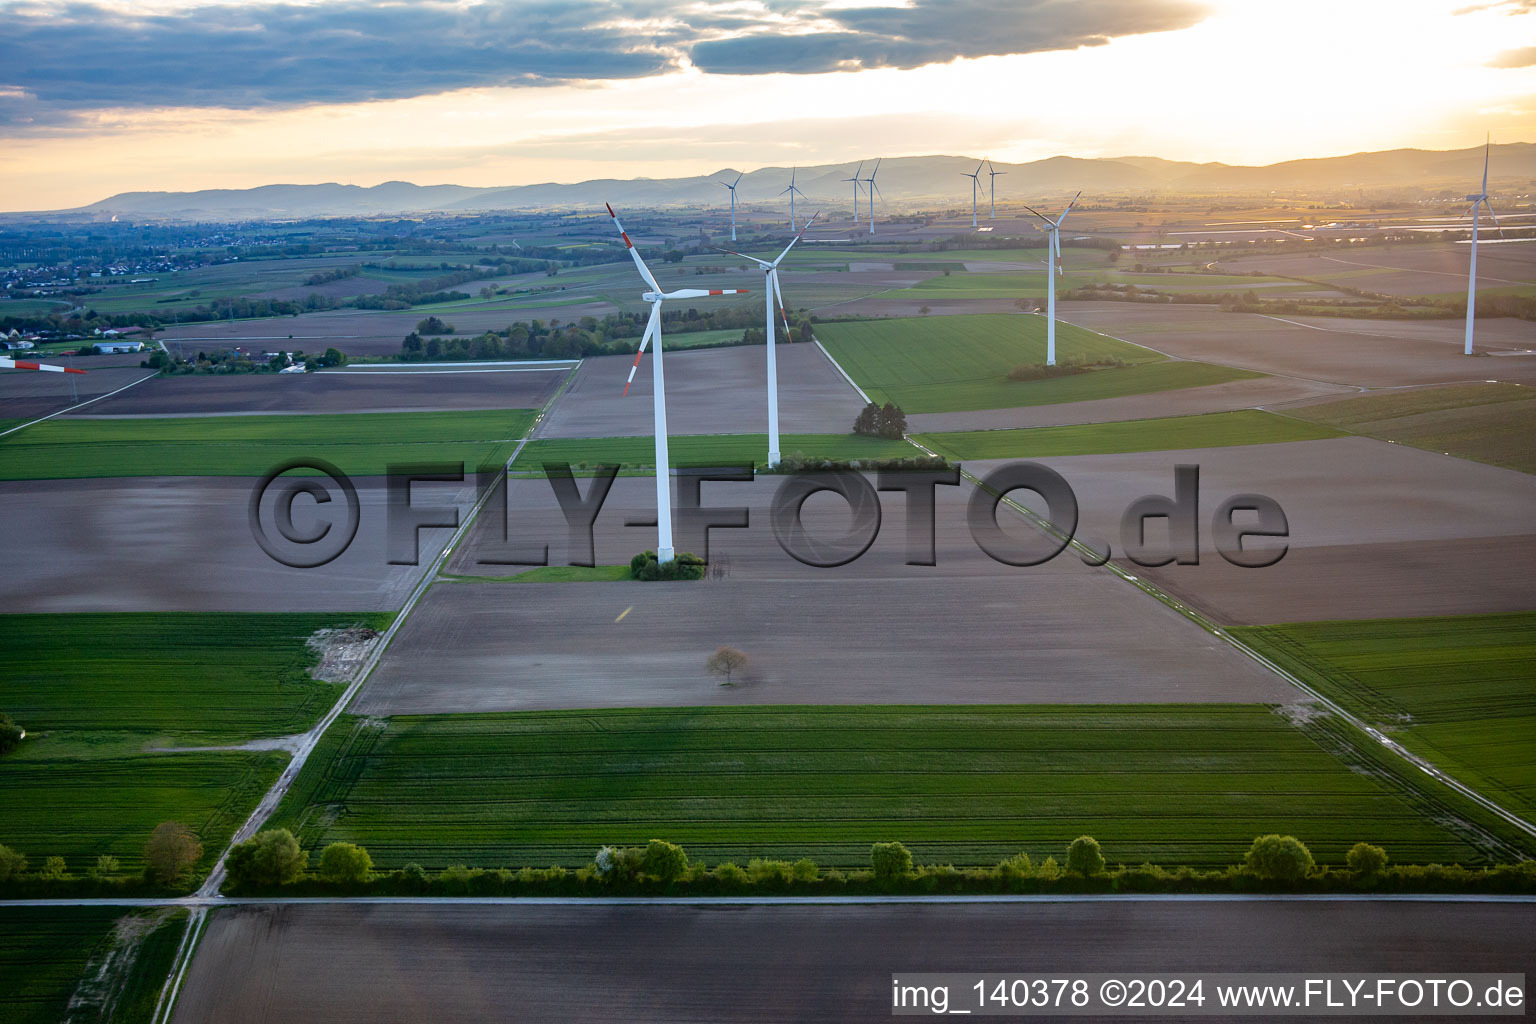 Aerial view of Wind farm Minfeld in Minfeld in the state Rhineland-Palatinate, Germany